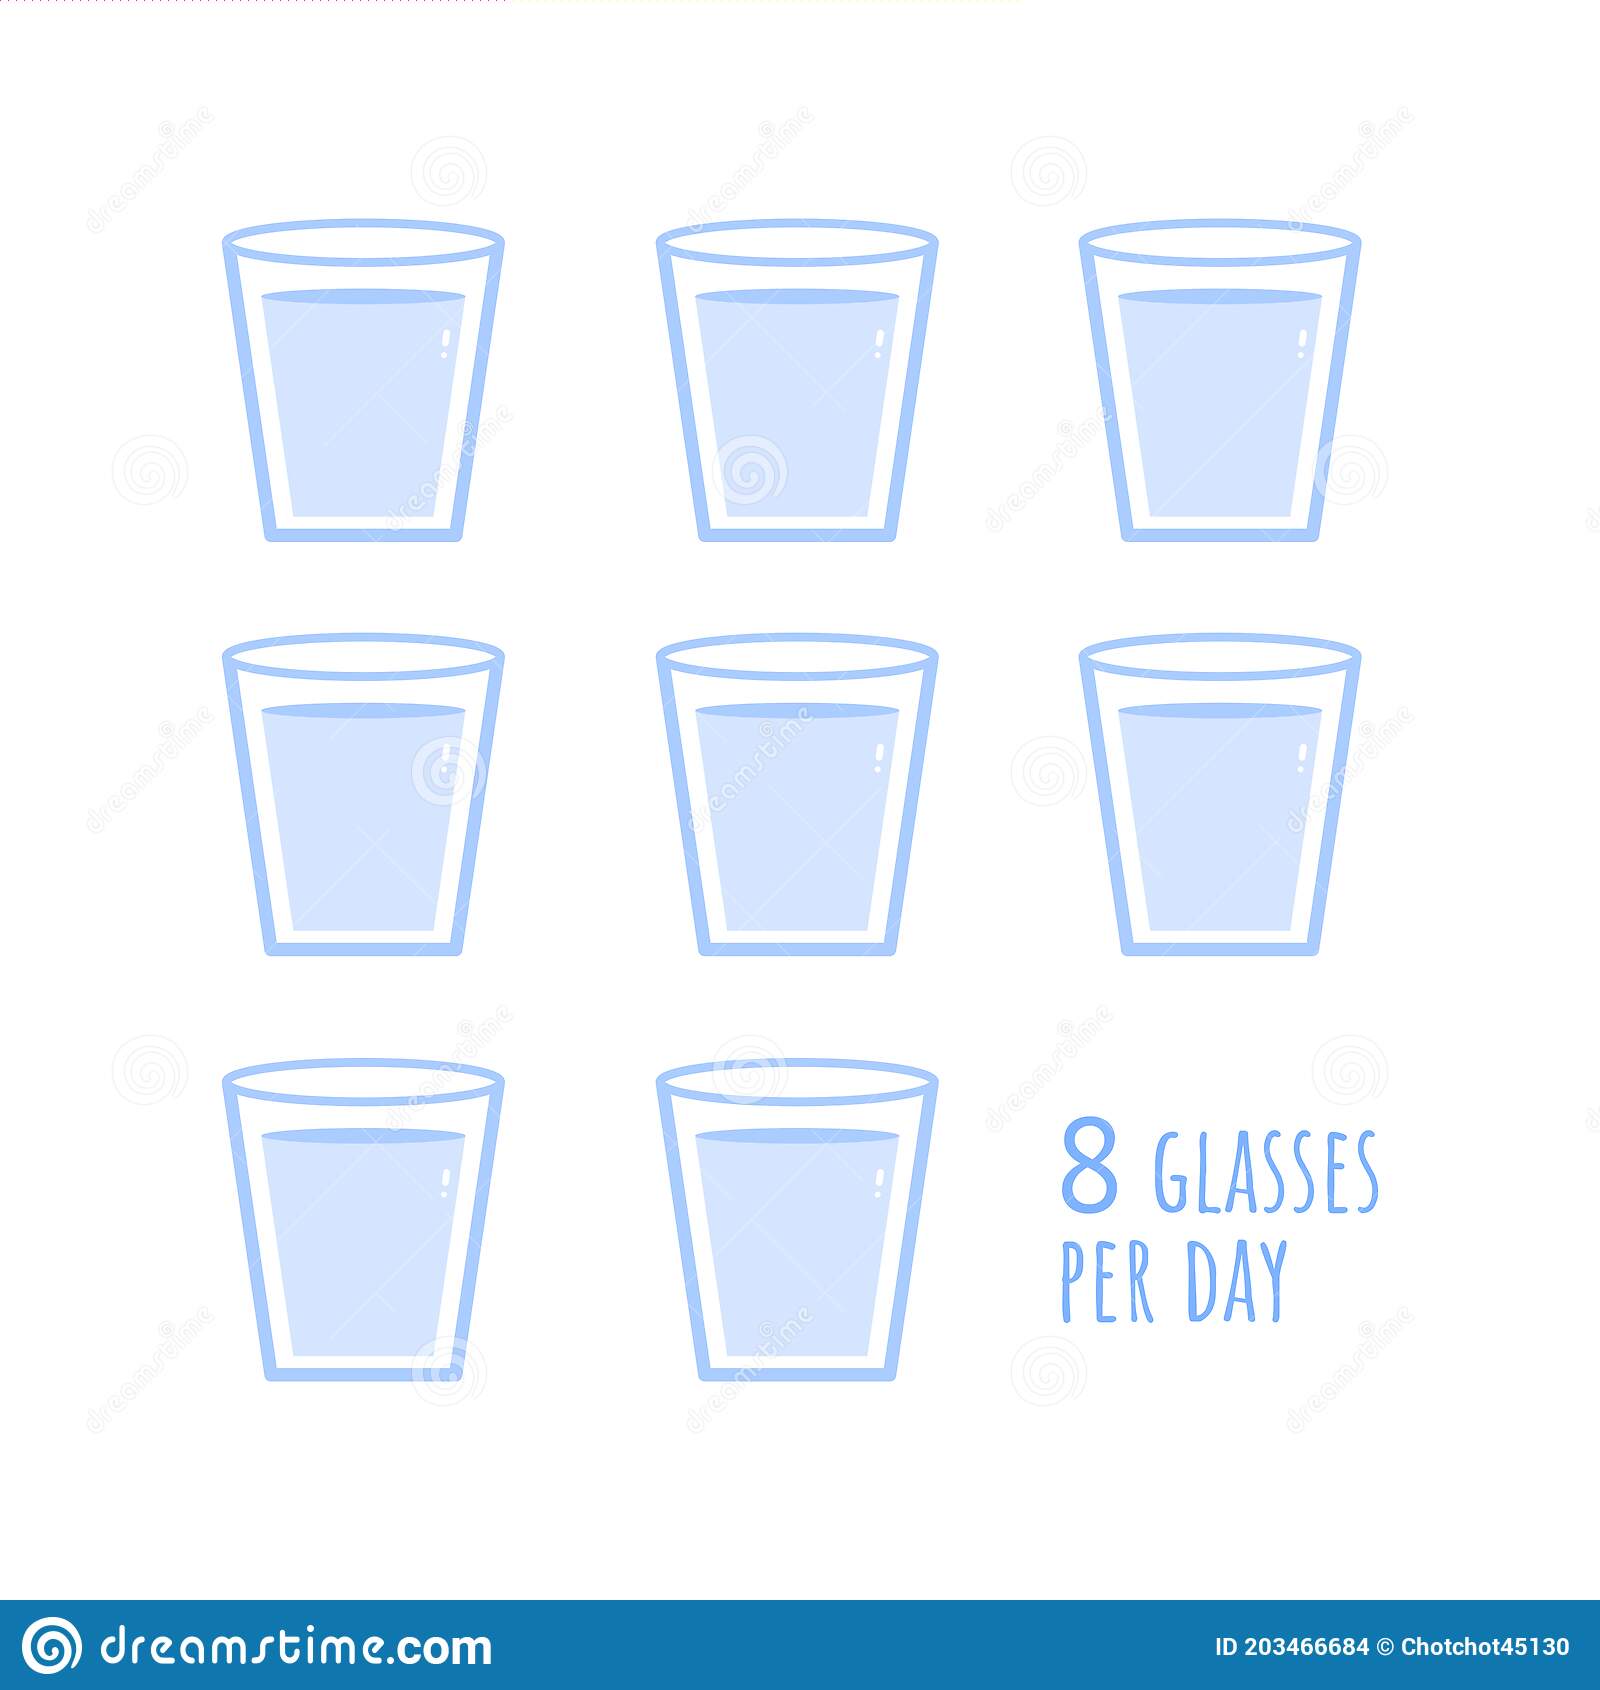 Reminder: Drink 8 glasses of water a day !